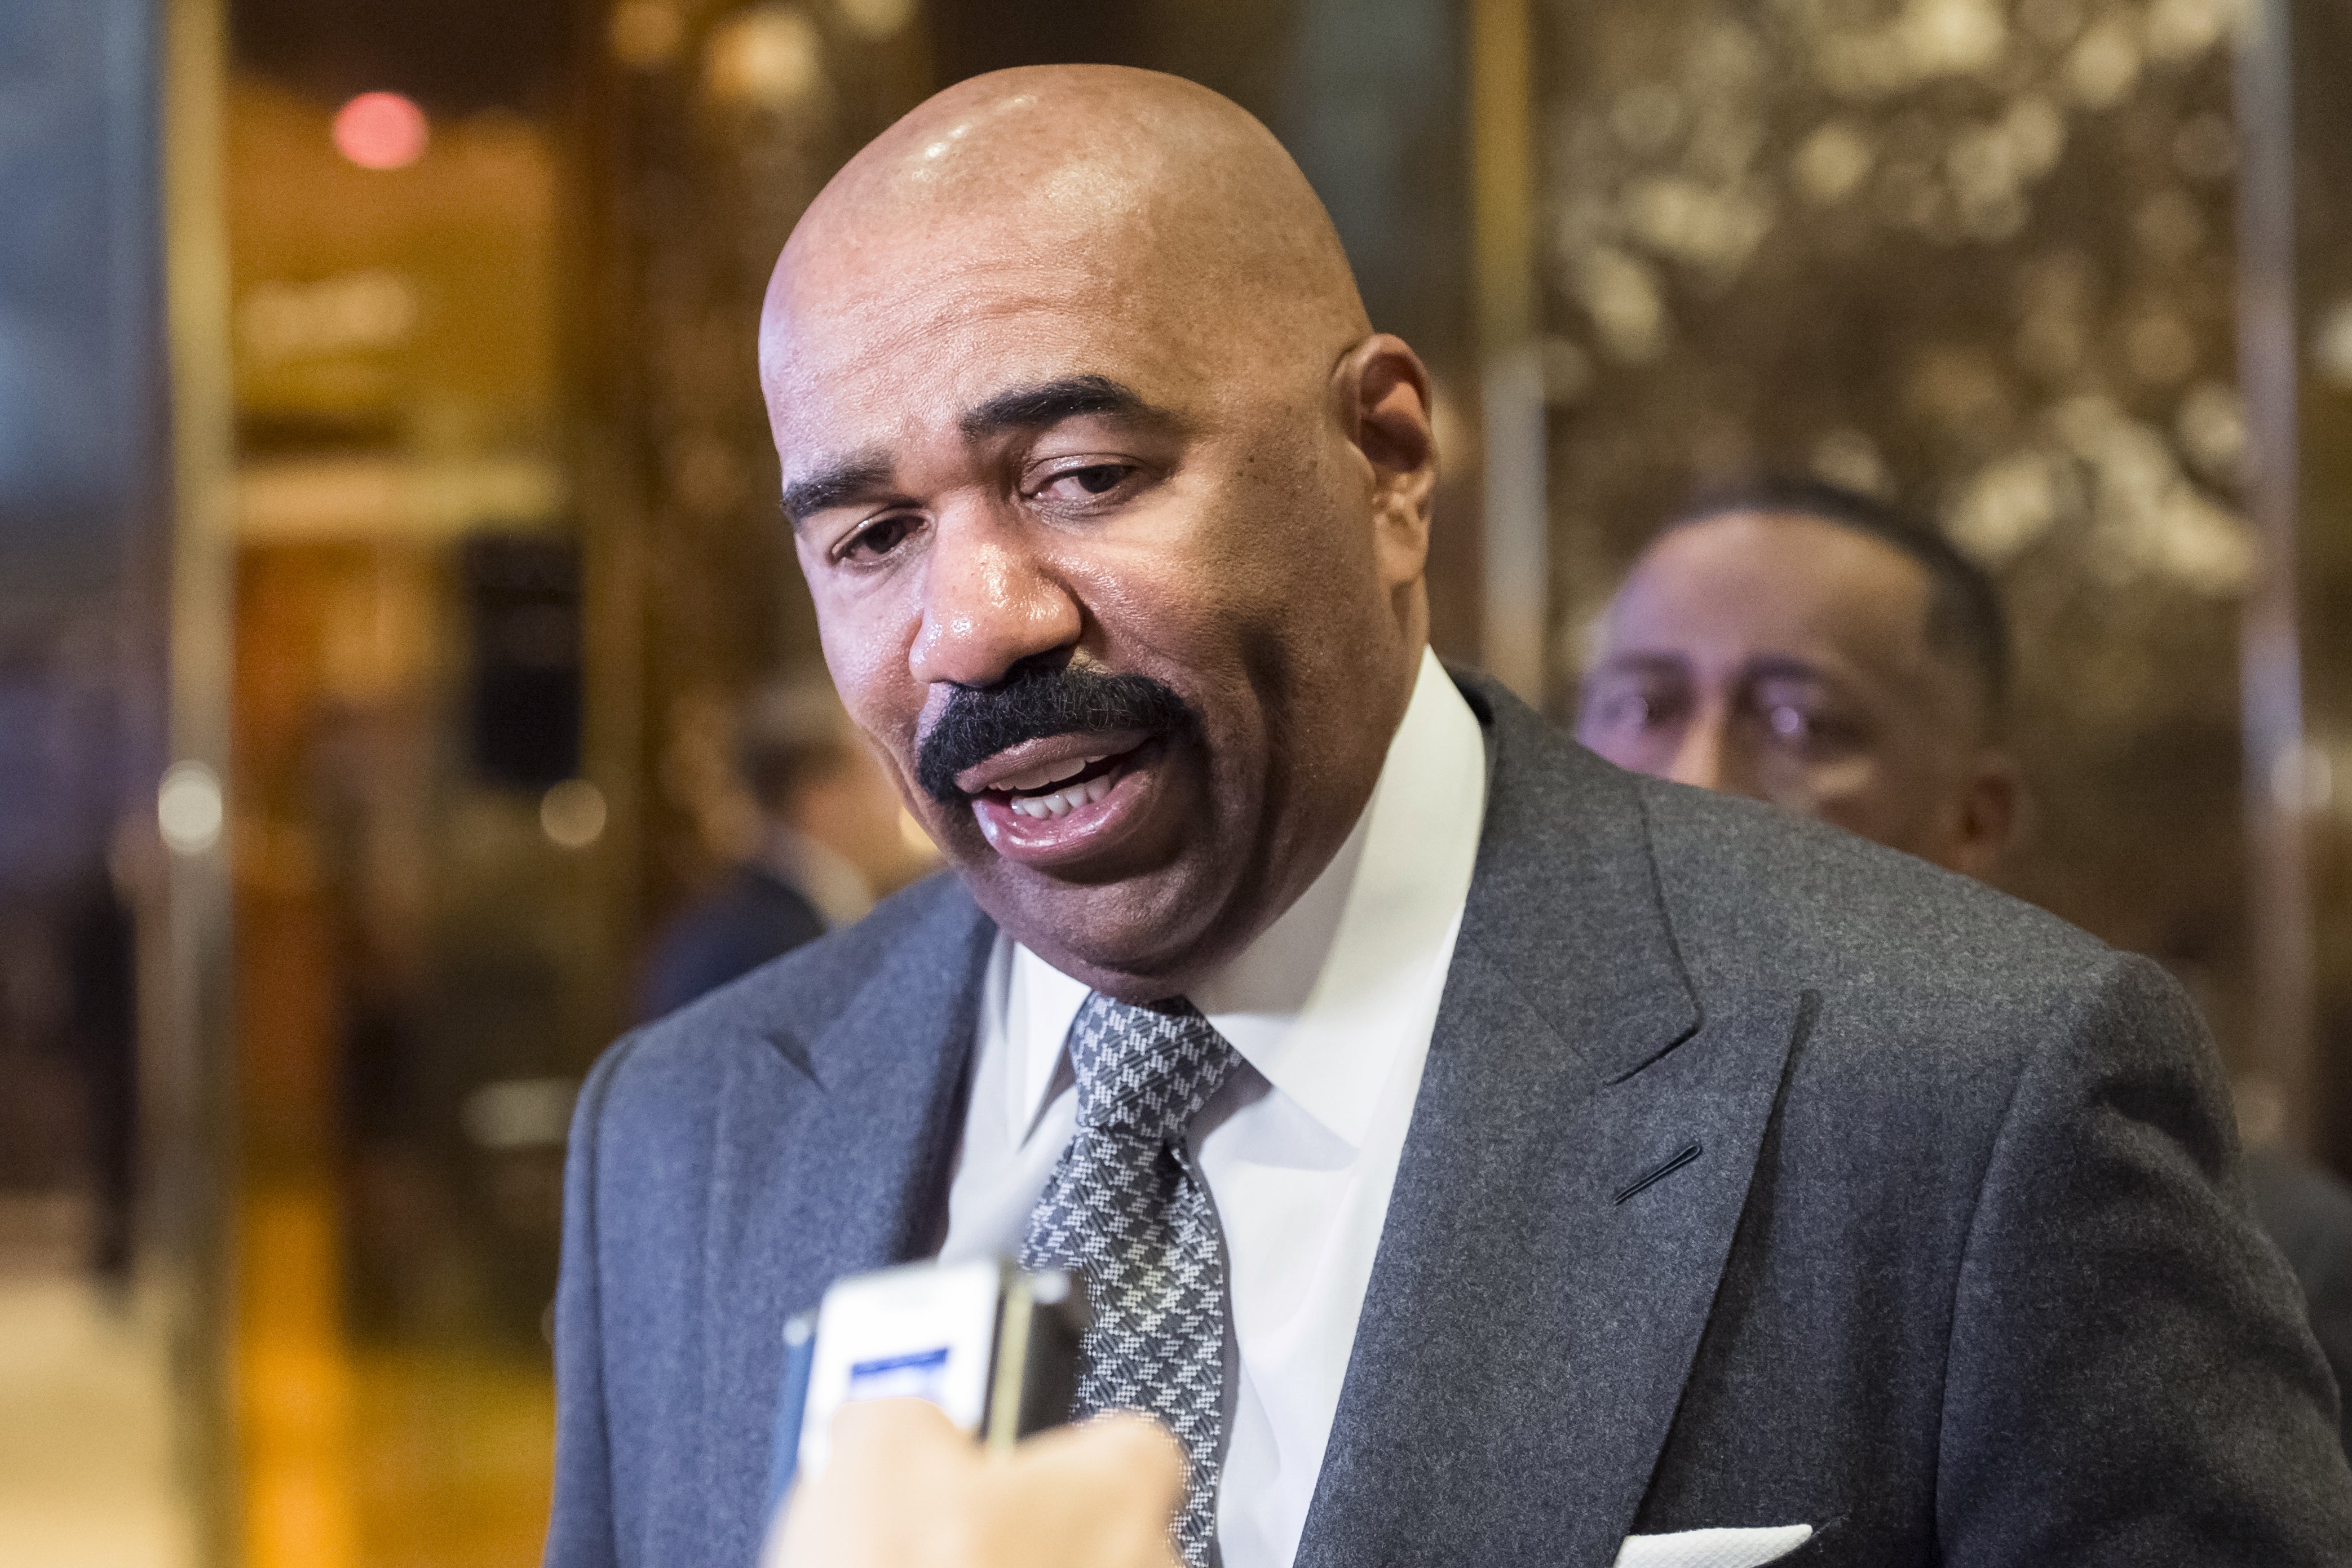 Steve Harvey Opens Up About What He 'Learned' from His Leaked Staff Memo & Says He's 'Not a Mean-Spirited Guy'
